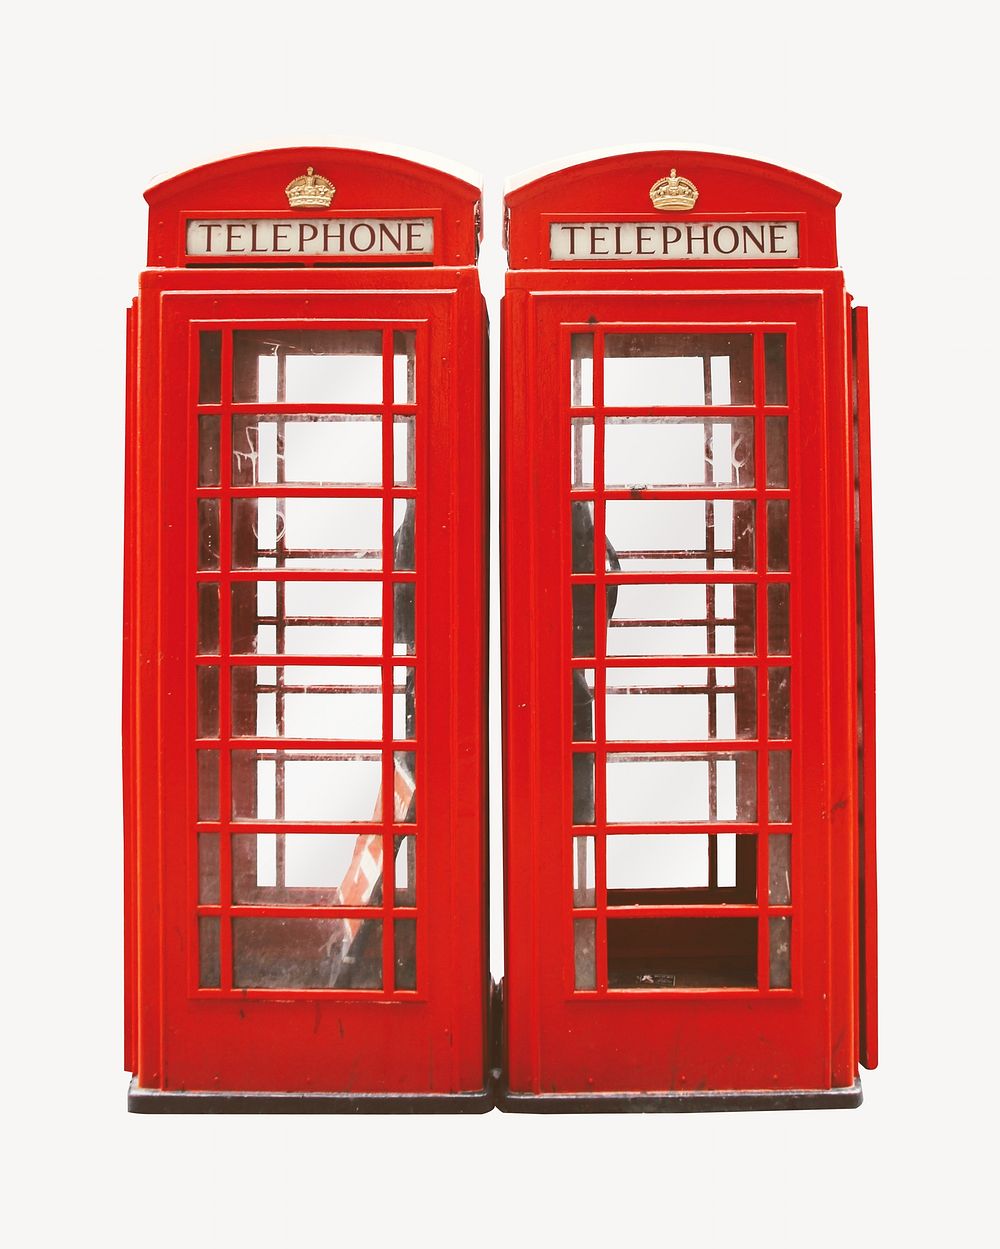 Telephone booths, London travel isolated design